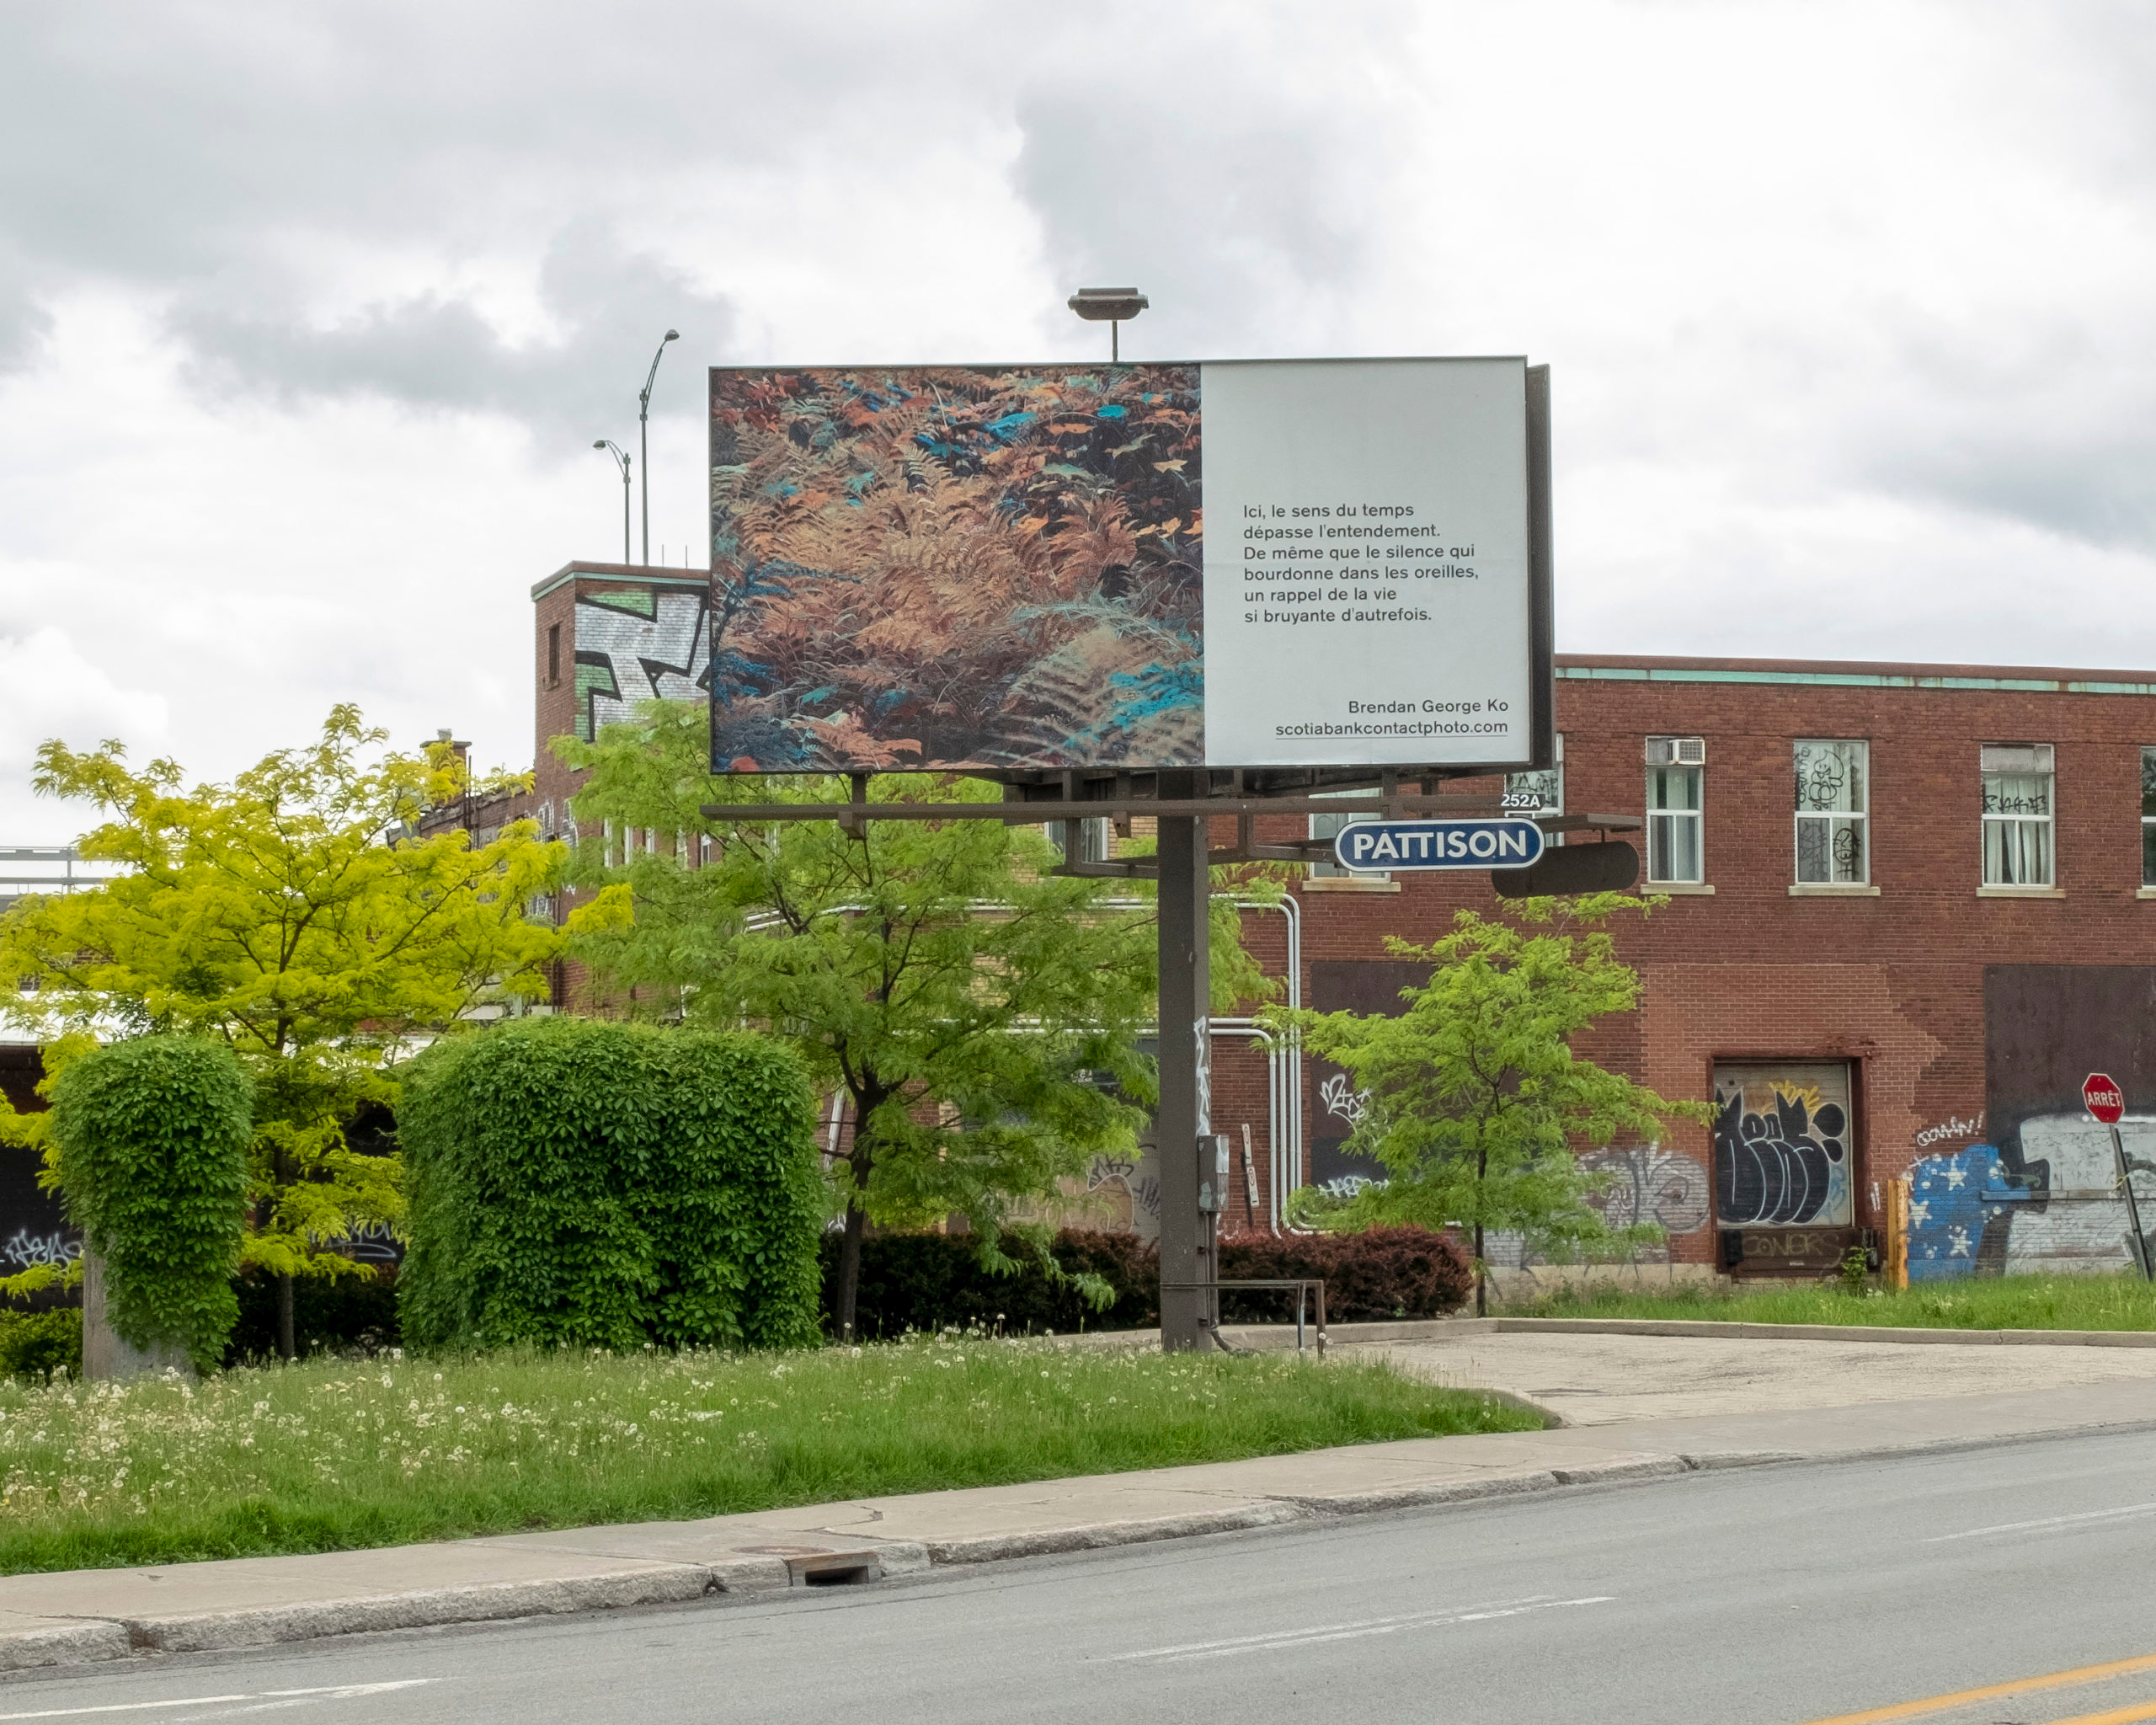     Brendan George Ko, The Forest is Wired for Wisdom, installation on billboards in Montreal and 9 other Canadian cities, 2022. Courtesy of the artist and CONTACT. Photo: Christopher Boyne

